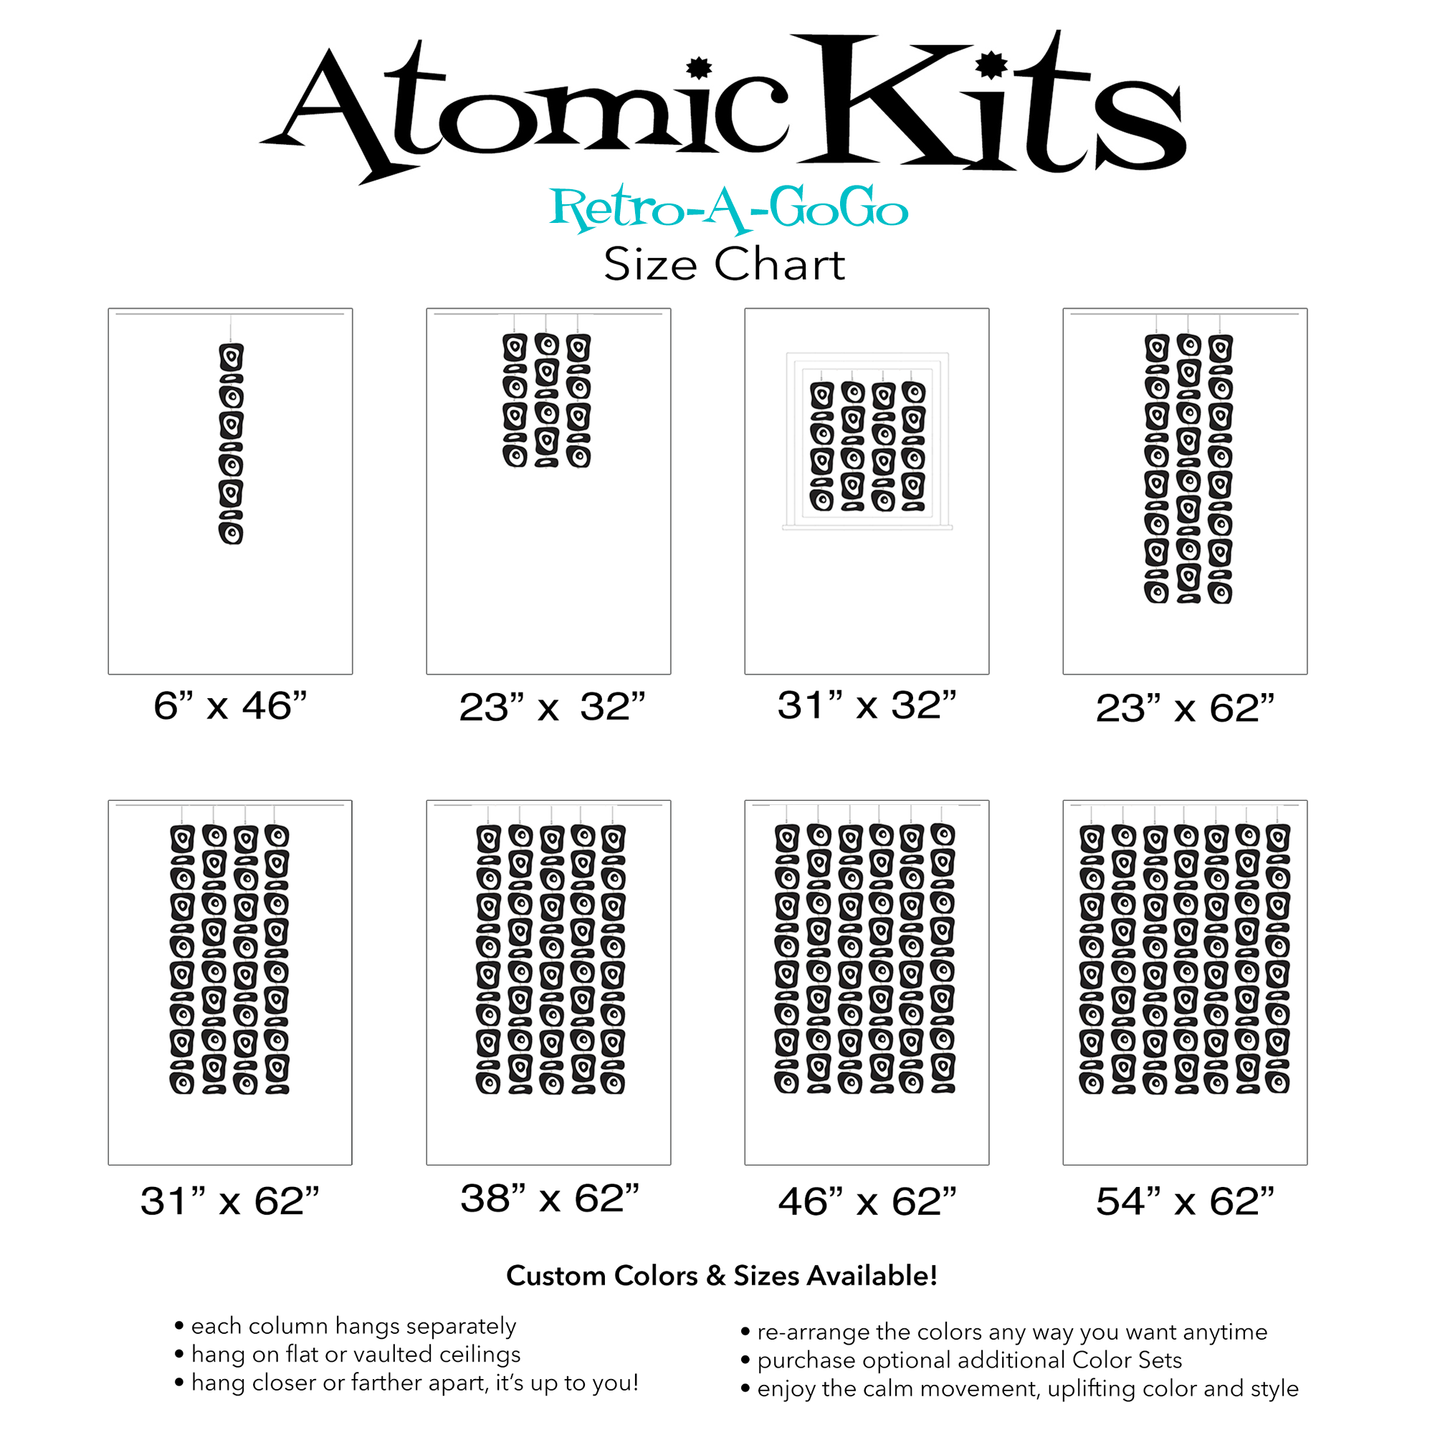 Size Chart for Retro-A-GoGo Style Atomic Kits to make hanging mobiles, curtains, and room dividers in mid century modern decor by AtomicMobiles.com